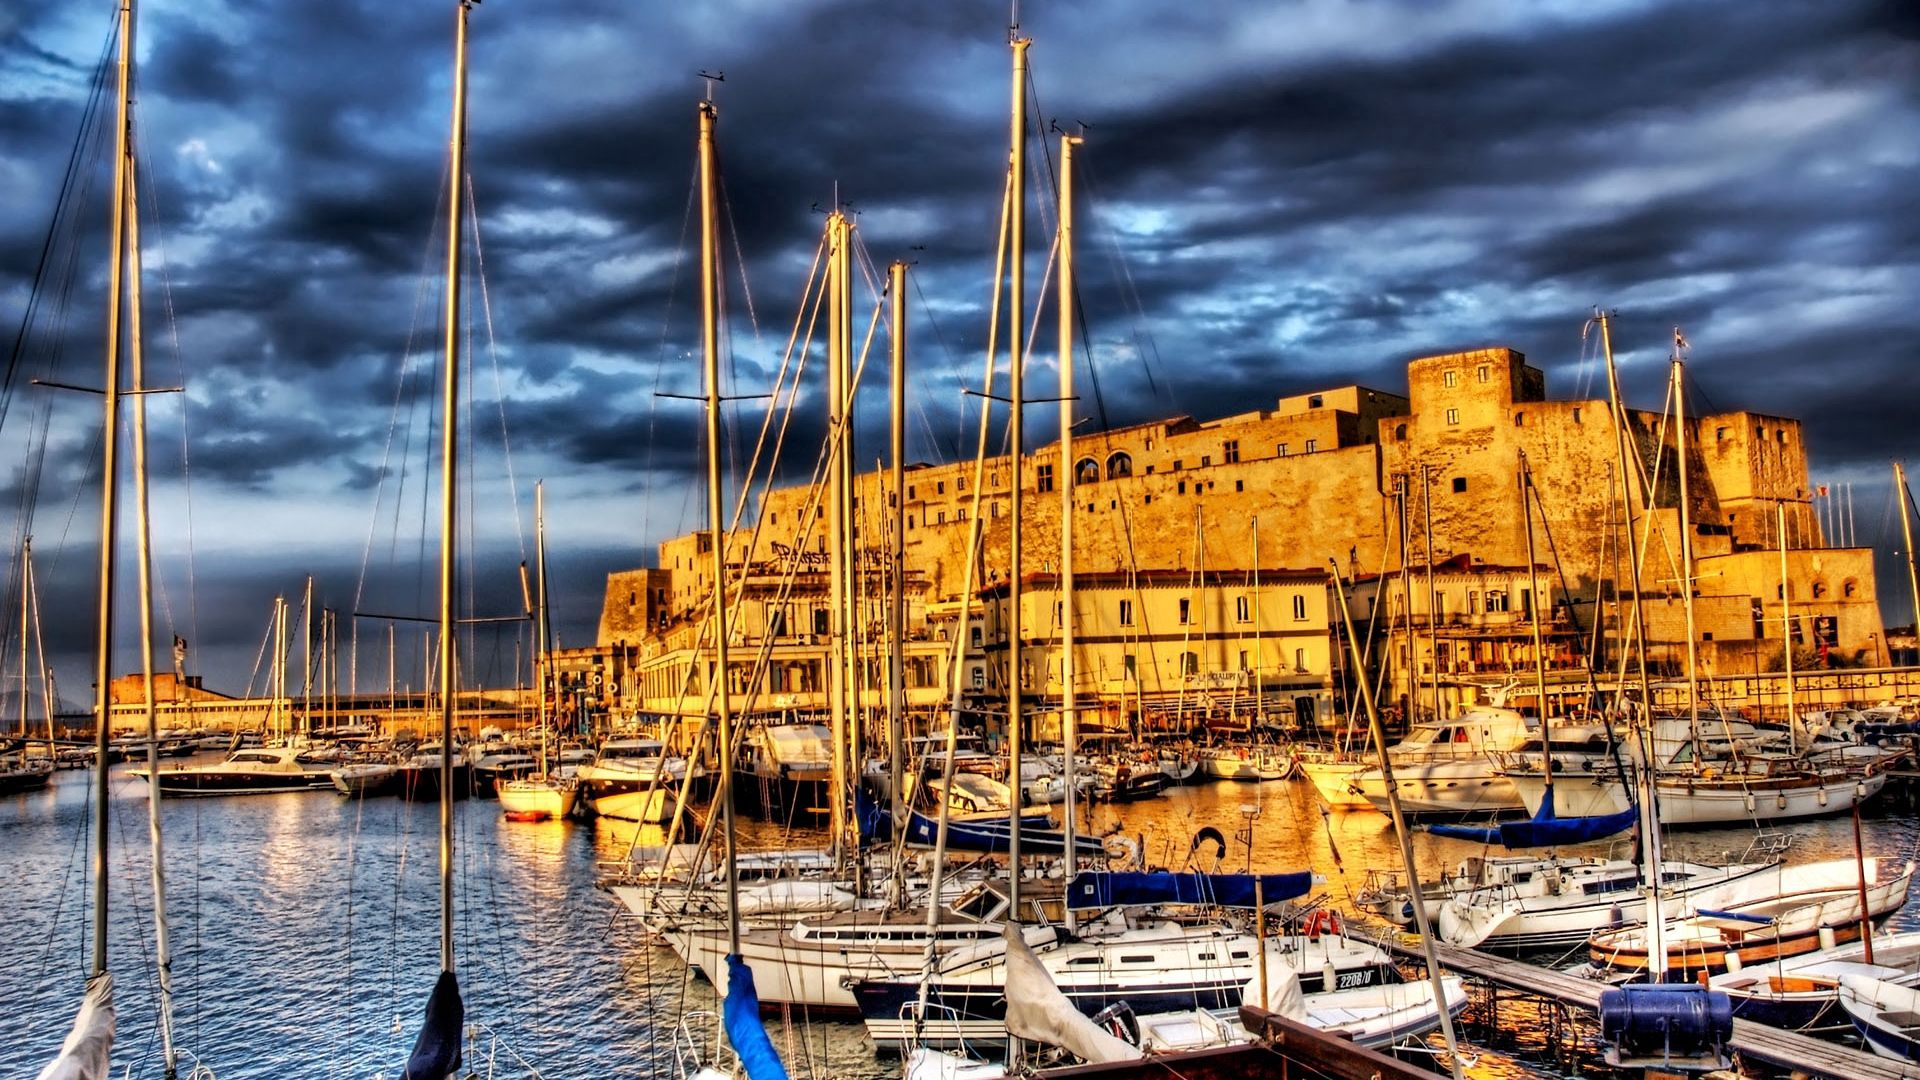 boats, cities, yachts, building, pier, france, hdr, terra minor cellphone